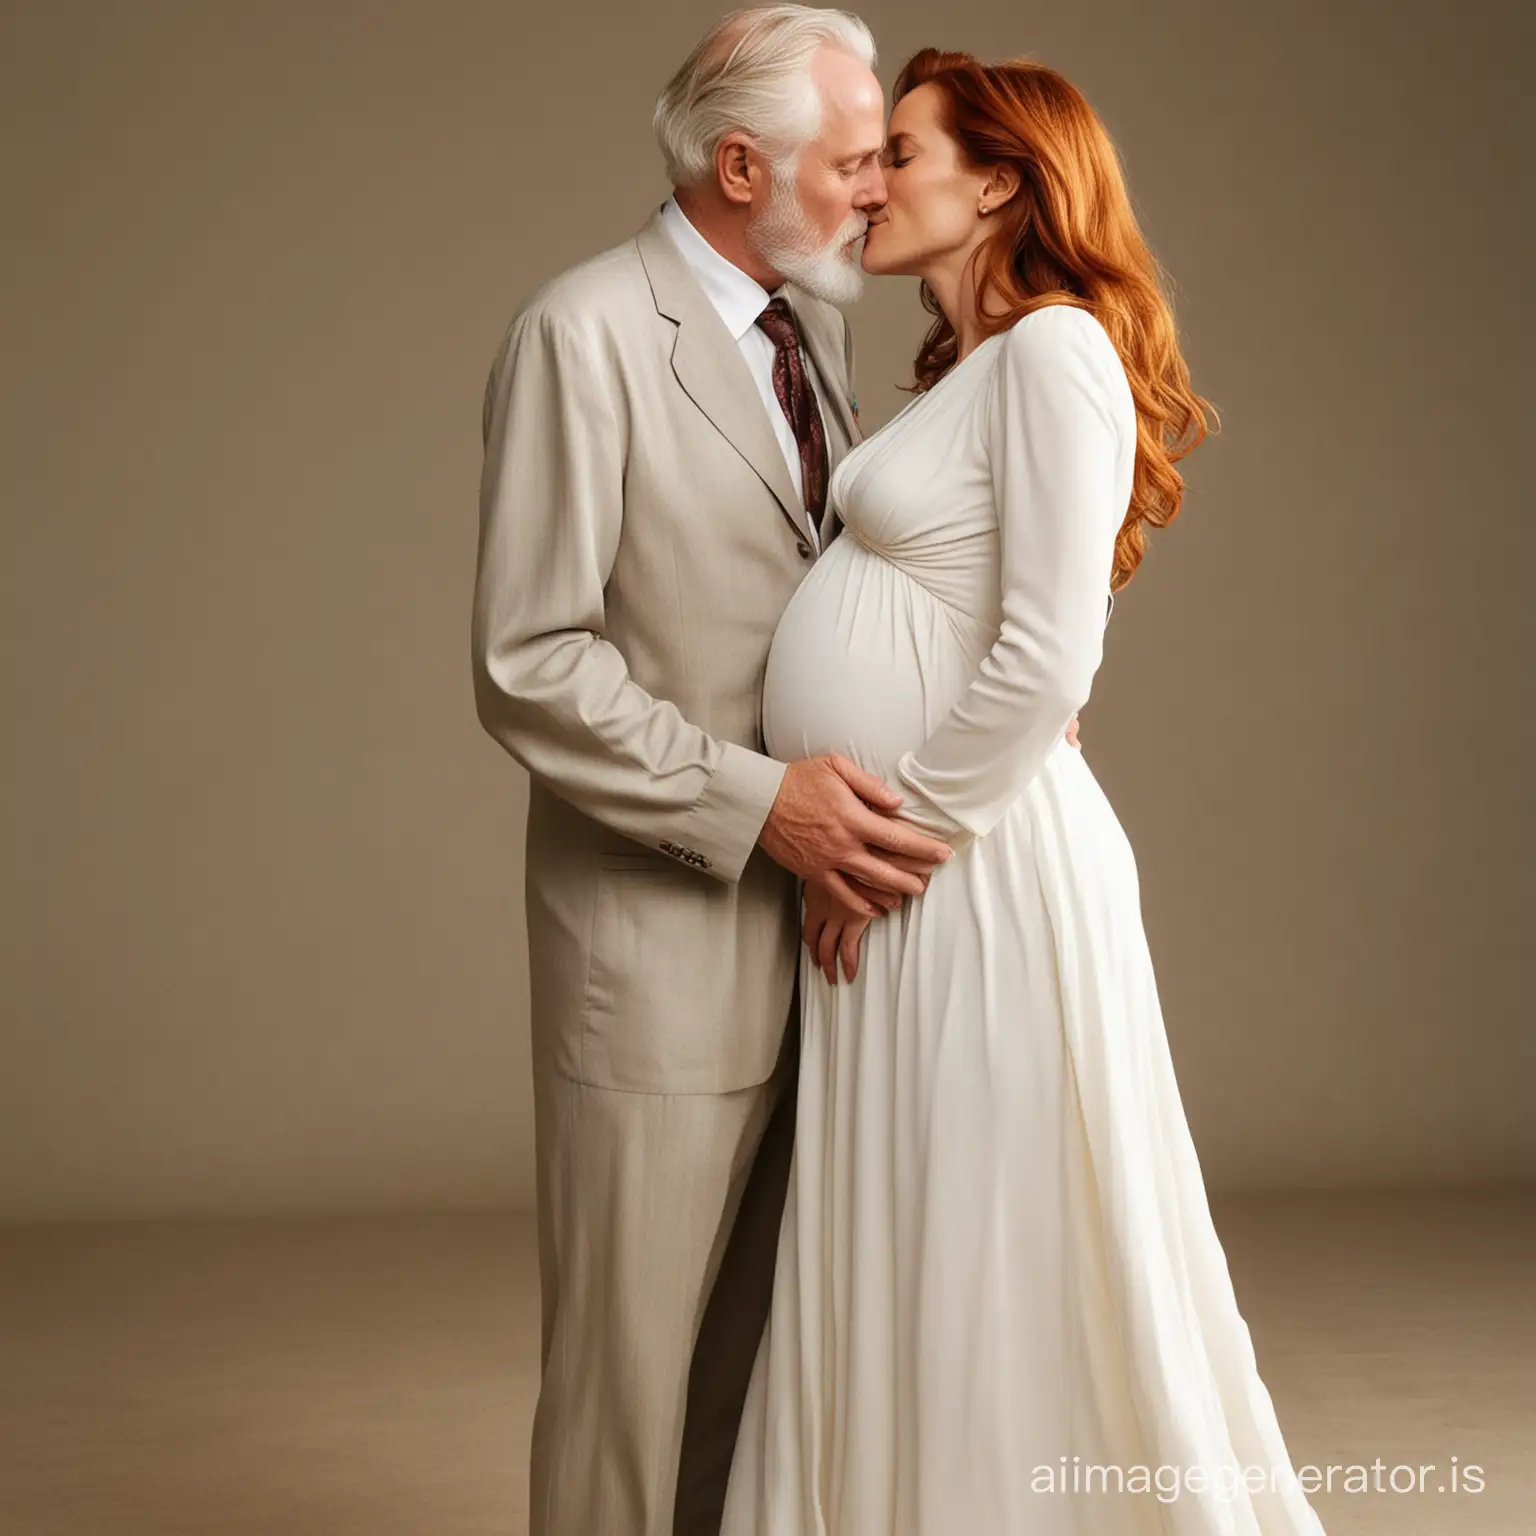 red haired Gillian Anderson wearing a floor-length loose billowing maternity maxi dress kissing an old man who seems to be her newlywed husband